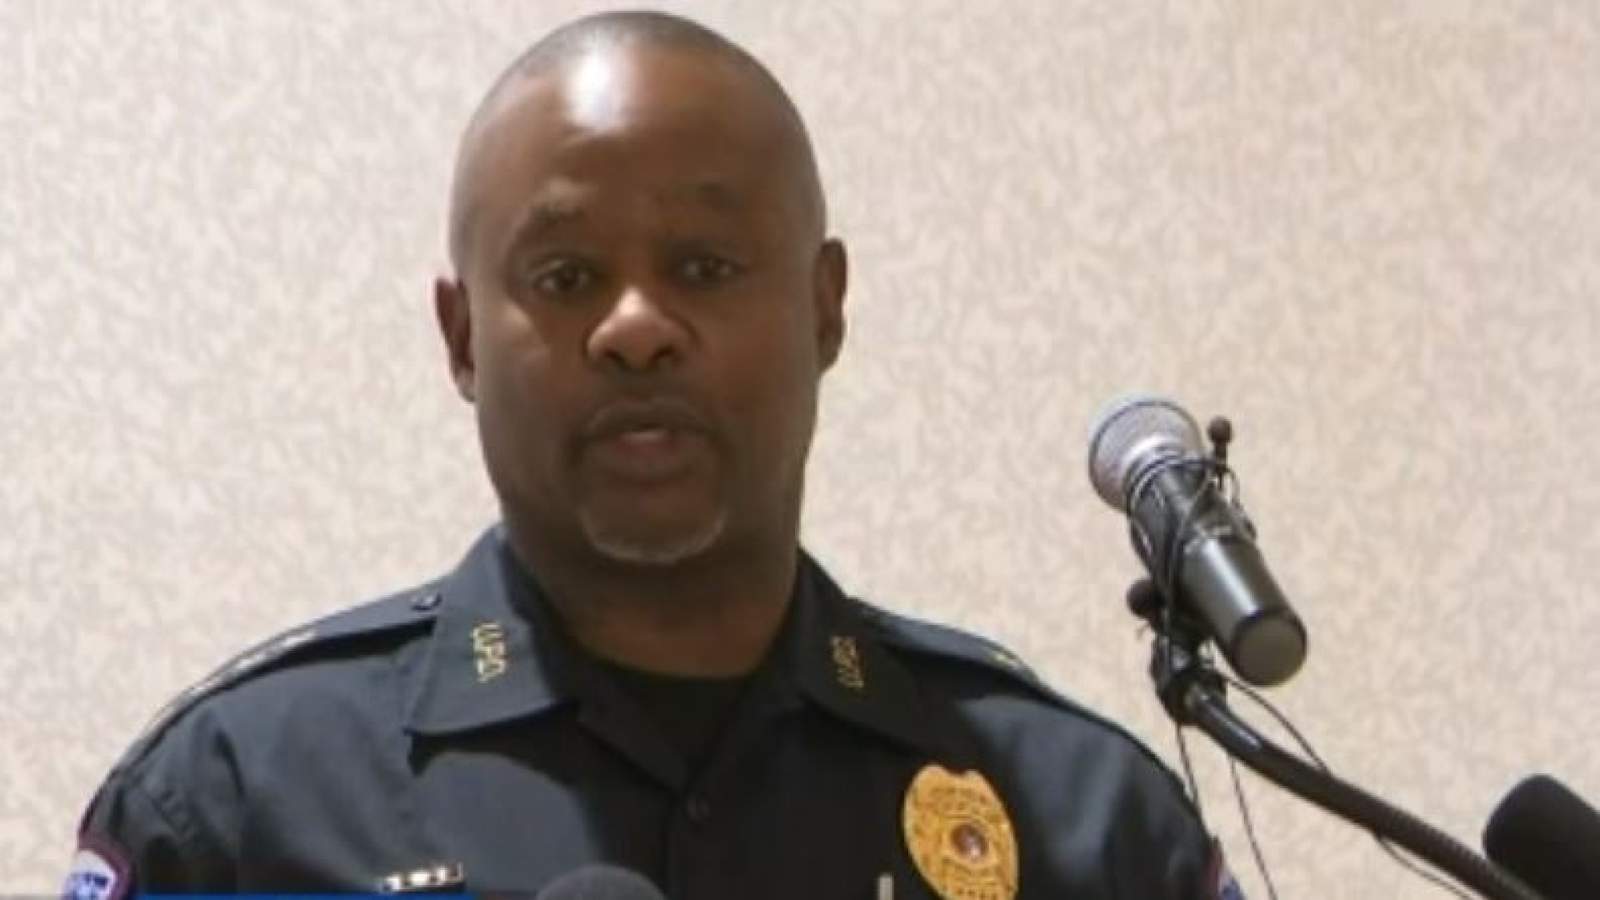 Officials: Evidence supports SFA police incident wasn’t racially motivated